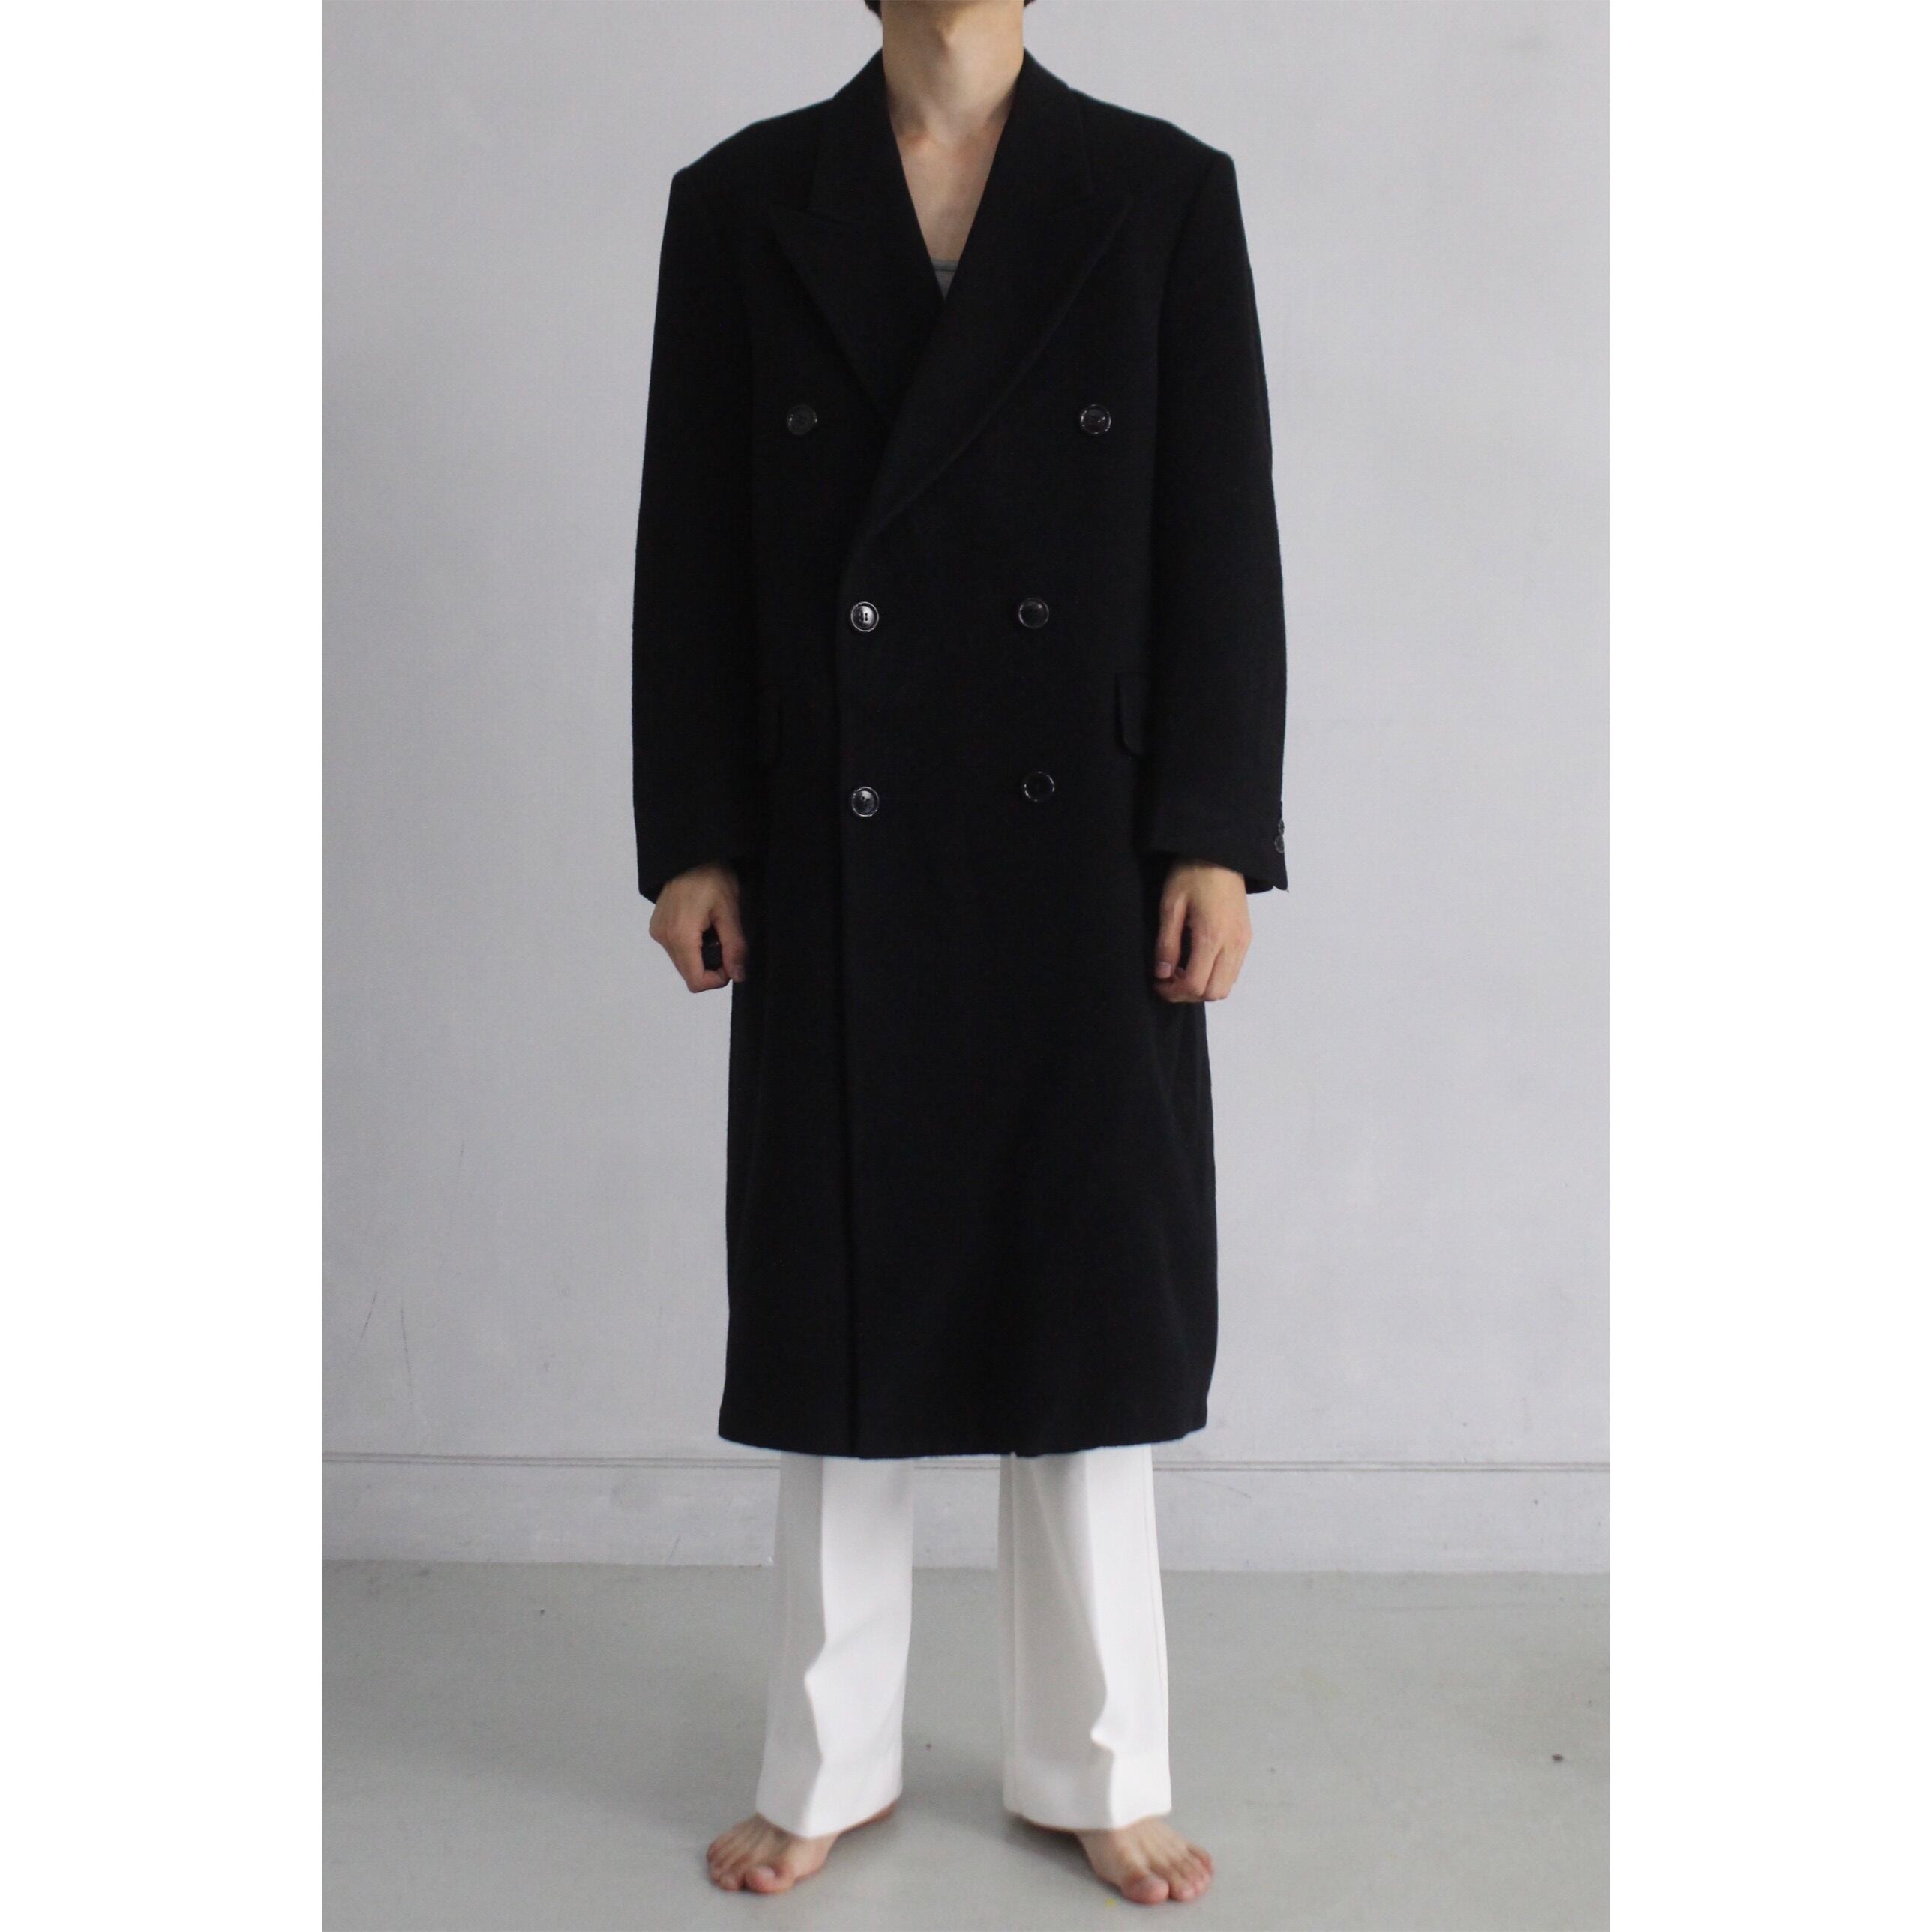 vintage double long chester wool coat